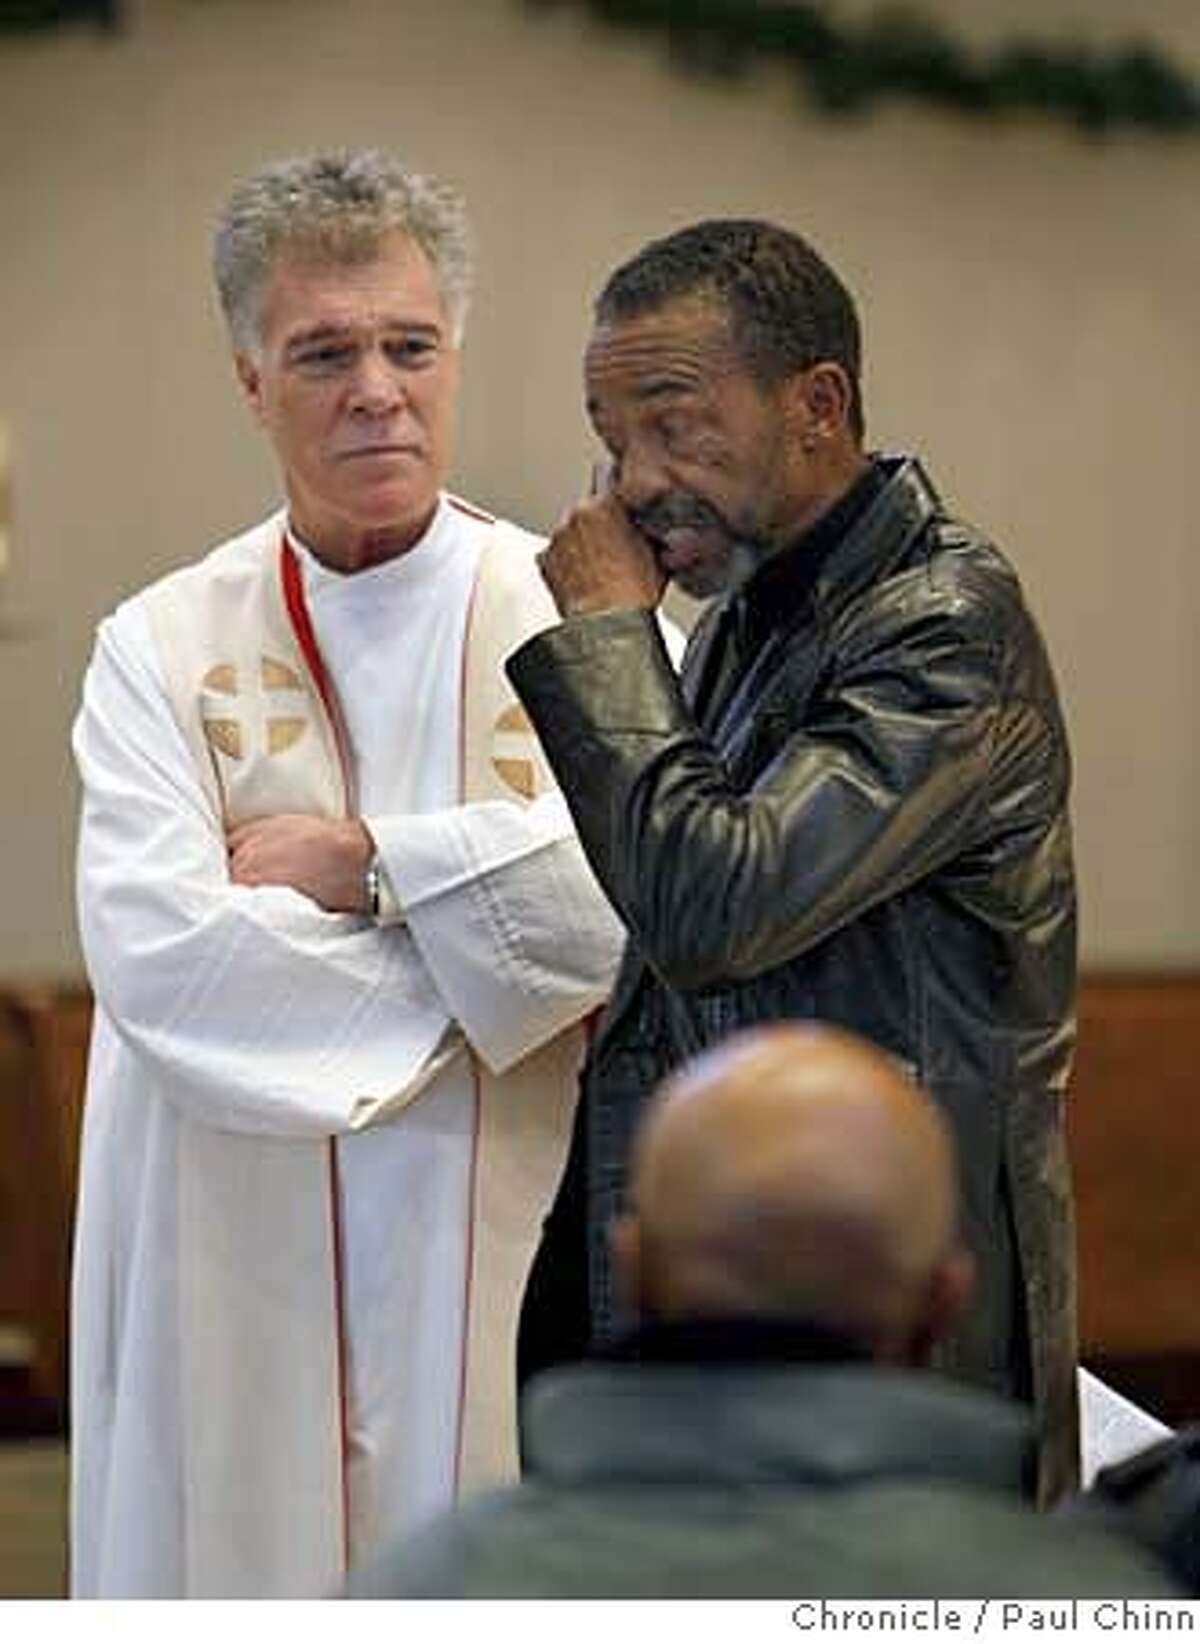 Father Seamus Genovese listens to Alphonzo Jackson tell a story about John Johnson during a memorial service for Johnson at Our Lady of Lourdes Church in Oakland, Calif. on Tuesday, Dec. 18, 2007. Johnson, a 47-year-old homeless man who was a fixture in the Grand Lake neighborhood, died Sunday, Dec. 9, from an apparent heart attack. About two dozen residents and merchants attended the service which was organized by longtime area neighbor Nancy Rieser. PAUL CHINN/The Chronicle **Seamus Genovese, Alphonzo Jackson, John Johnson, Nancy Rieser MANDATORY CREDIT FOR PHOTOGRAPHER AND S.F. CHRONICLE/NO SALES - MAGS OUT